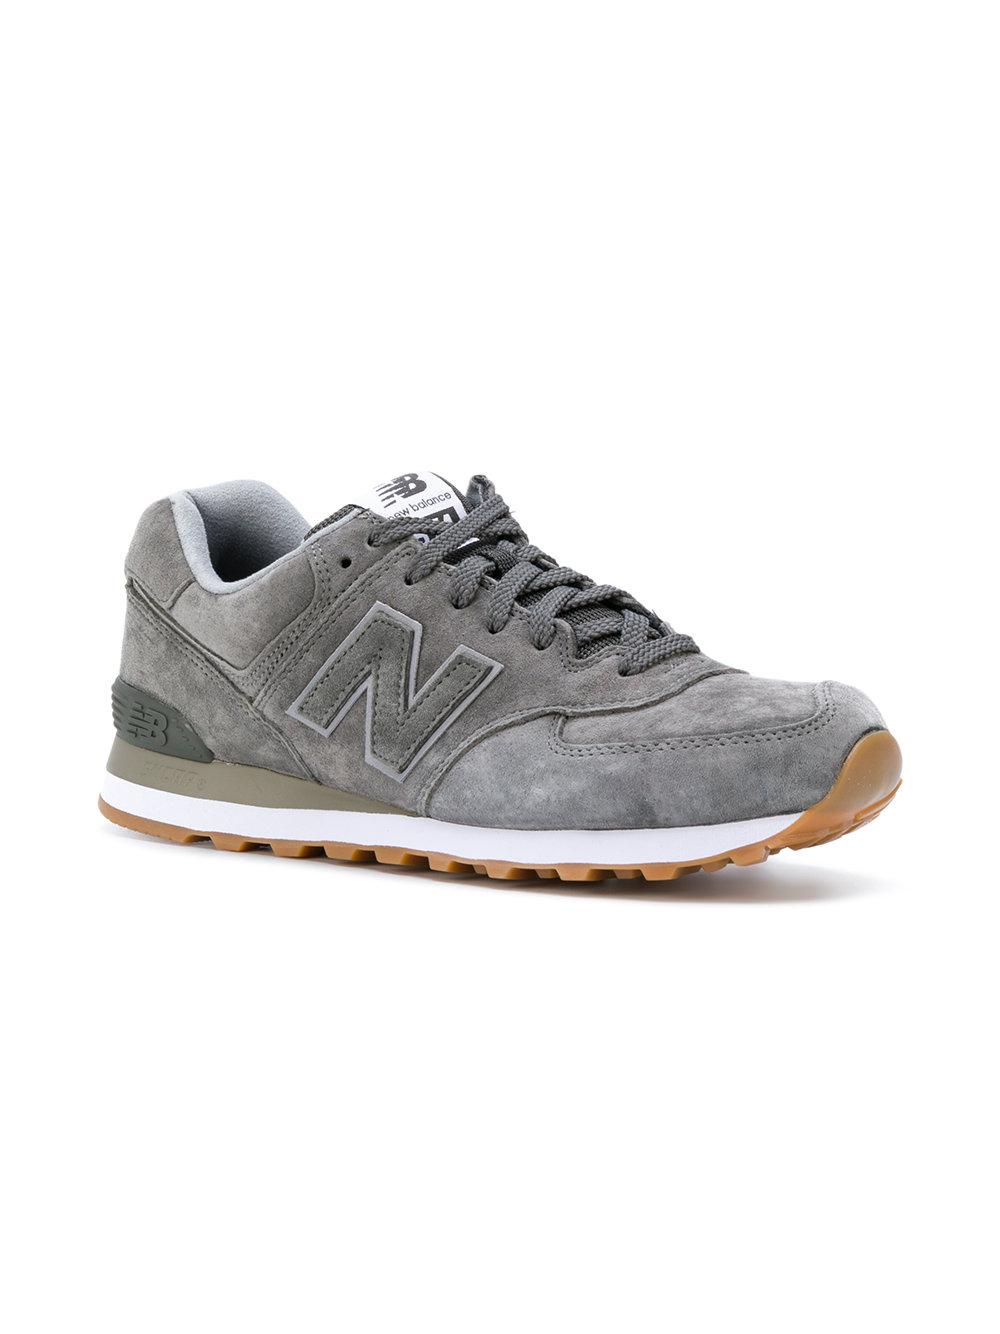 New Balance Suede Gum Pack 574 Sneakers in Grey (Gray) for Men - Lyst